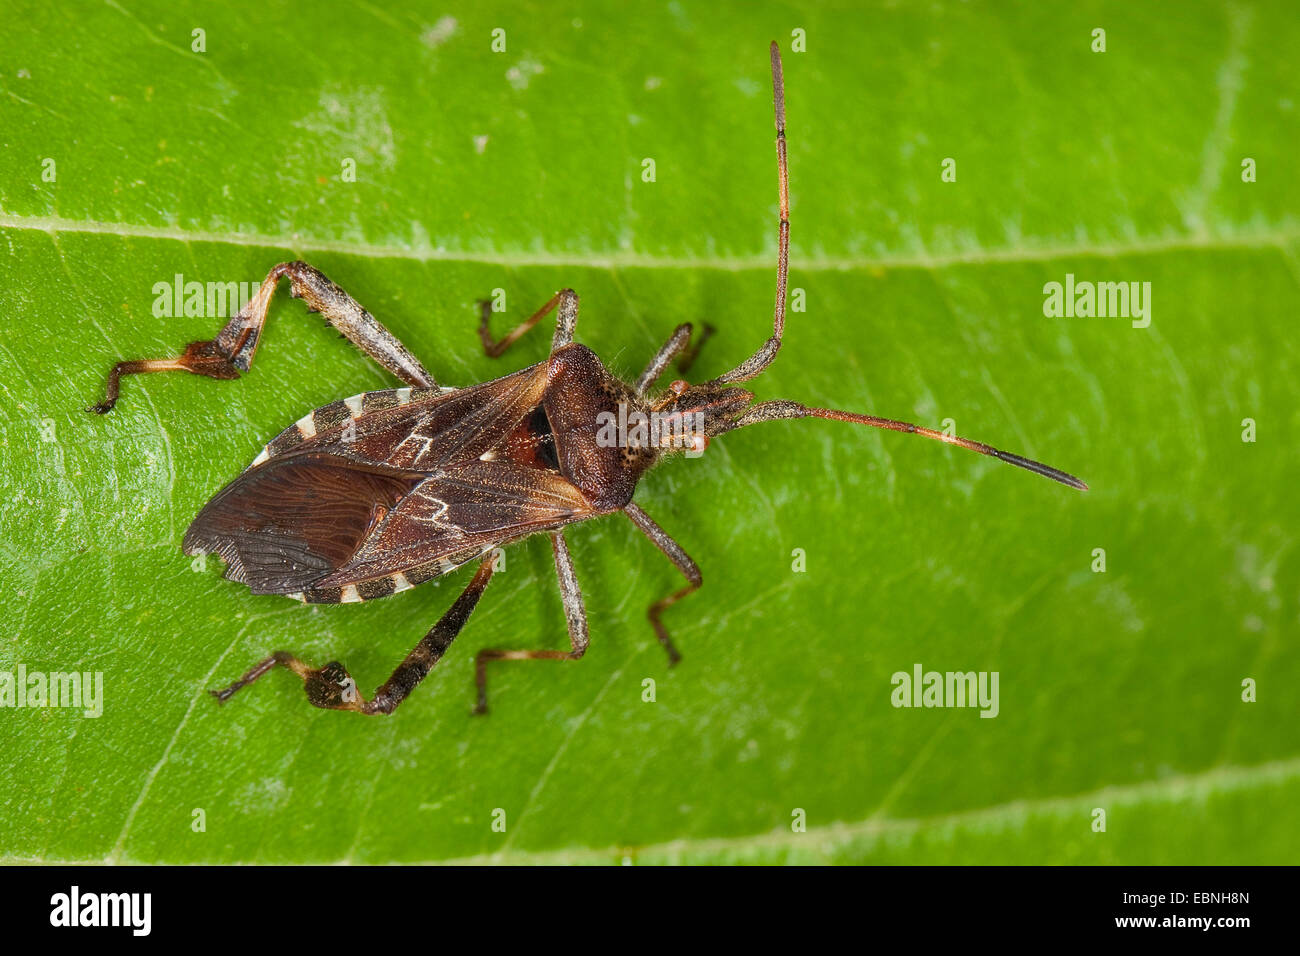 western conifer seed bug (Leptoglossus occidentalis), sitting on a leaf, Germany Stock Photo